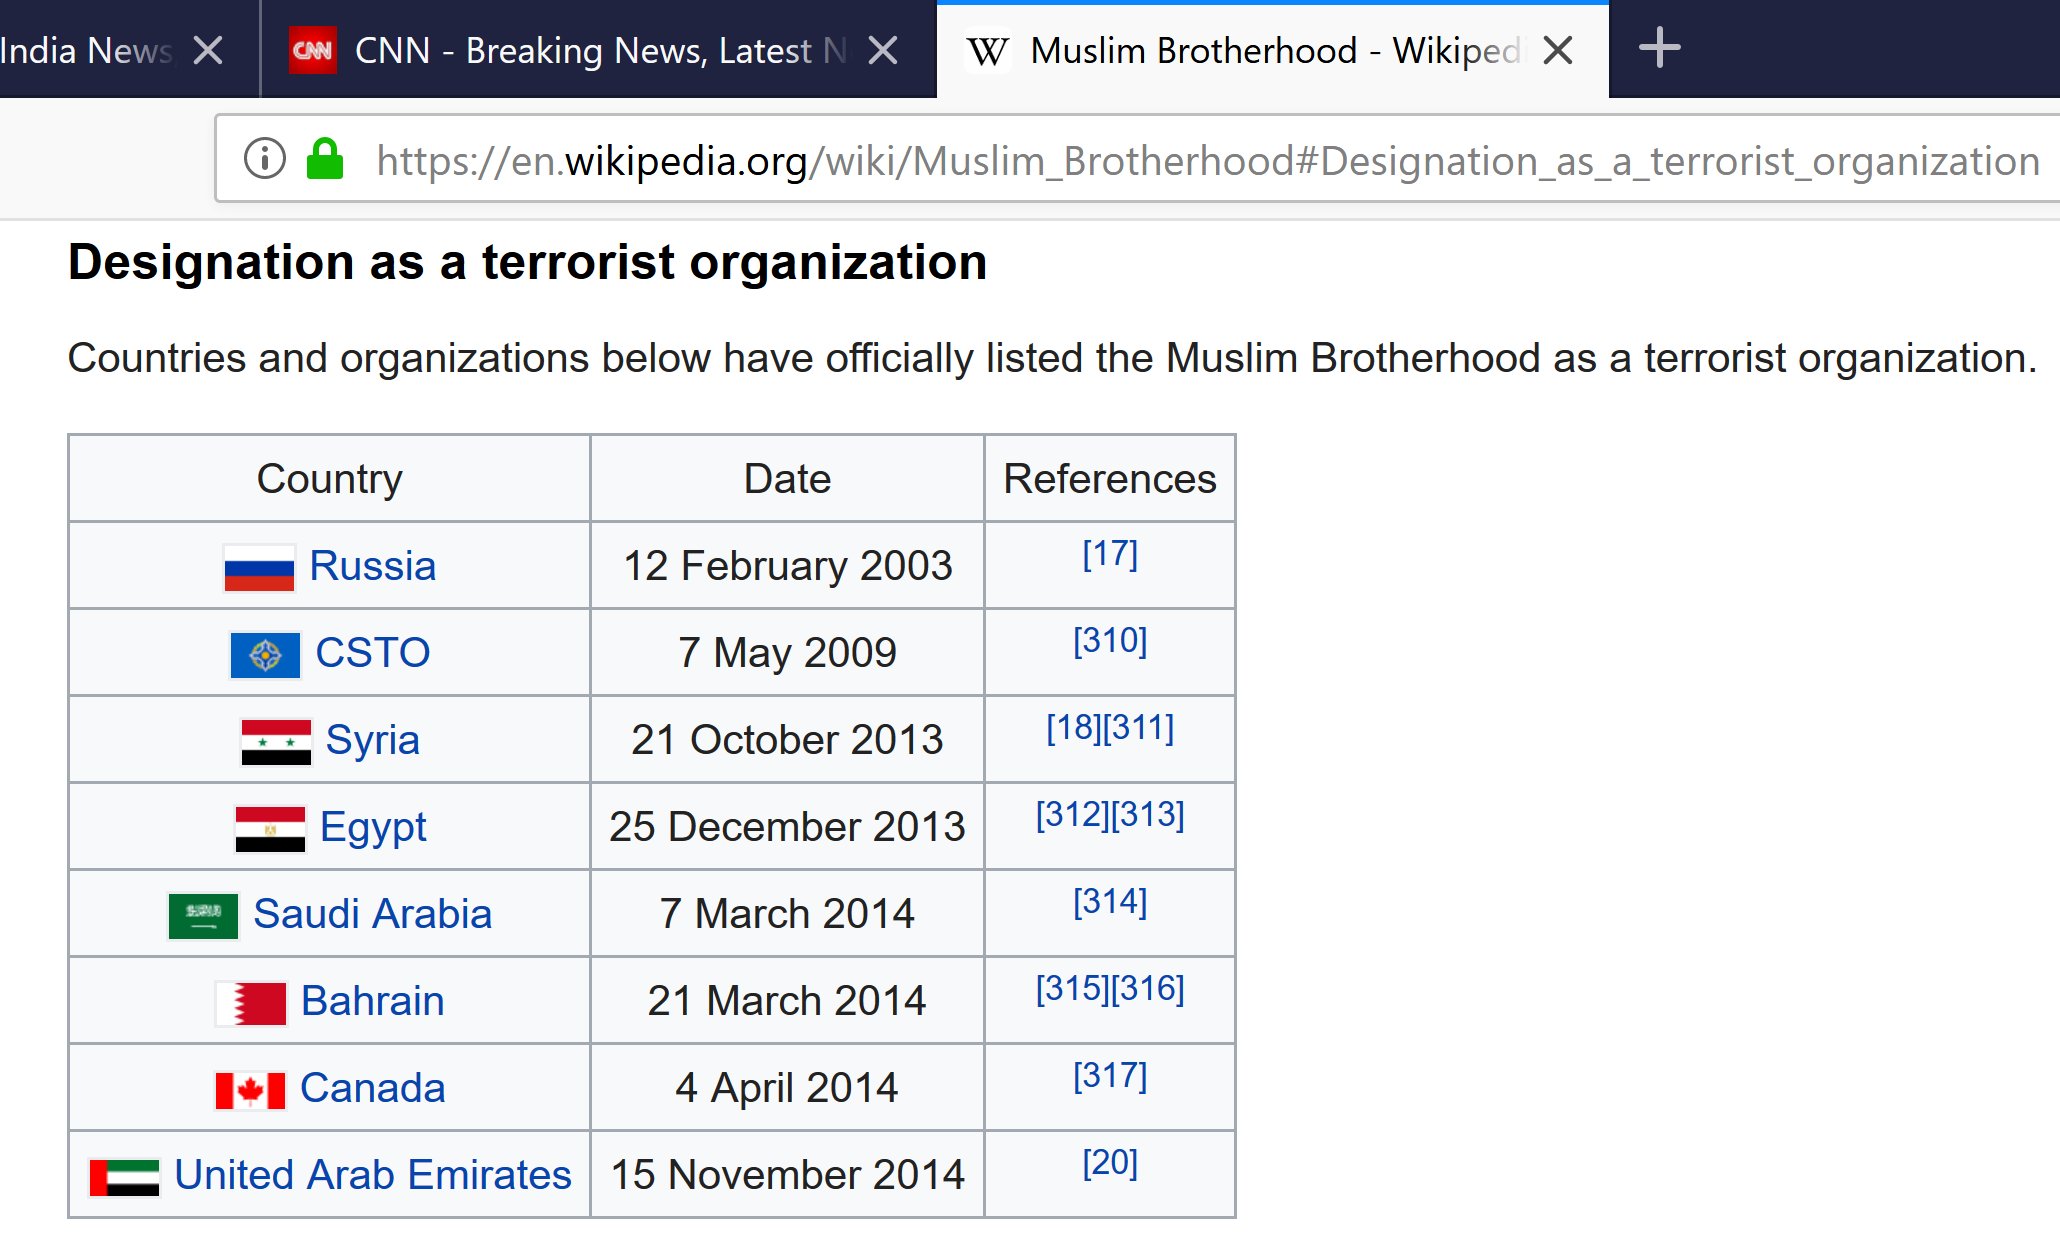 har taget fejl labyrint Reklame Rajiv Malhotra on Twitter: "@RahulGandhi - please note list of countries  below that official list Muslim Brotherhood as a terrorist organization.  How can you compare @RSSorg with it? @sambitswaraj https://t.co/z1Uip4k2Kw  https://t.co/7uo9Jxy5eS" /